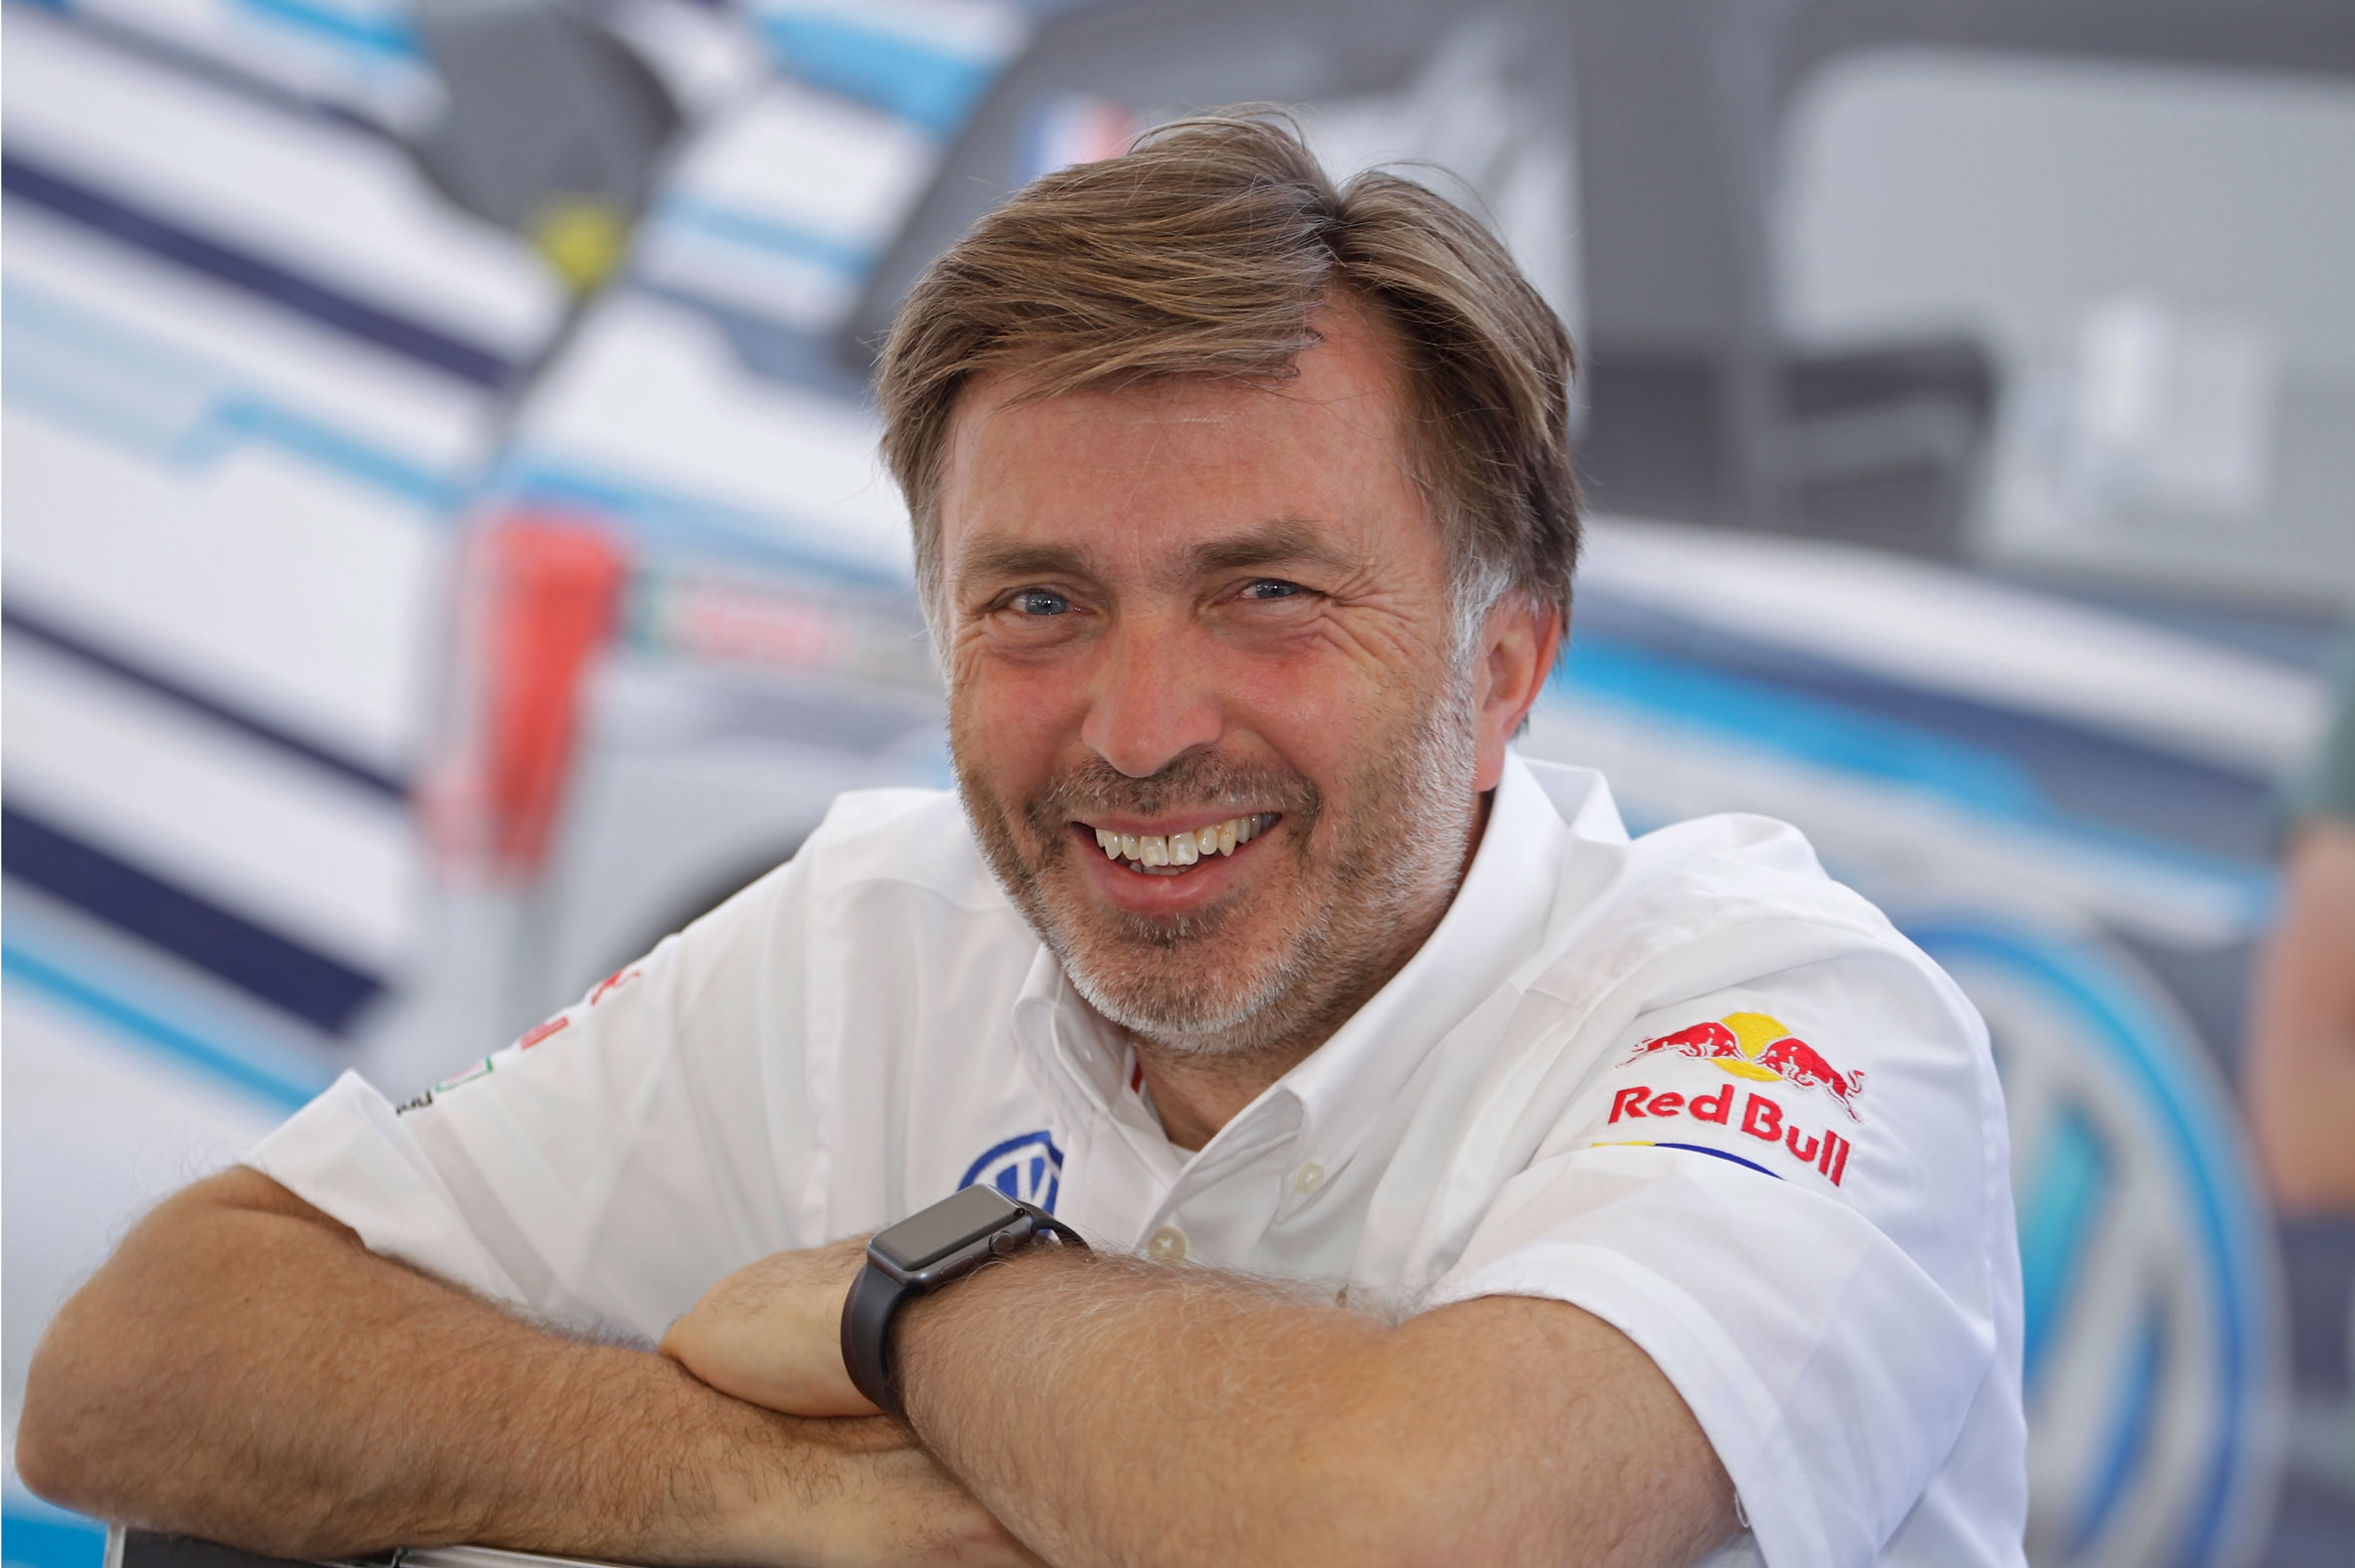 Williams announce former Mclaren boss Capito as new CEO as Roberts remains team principal